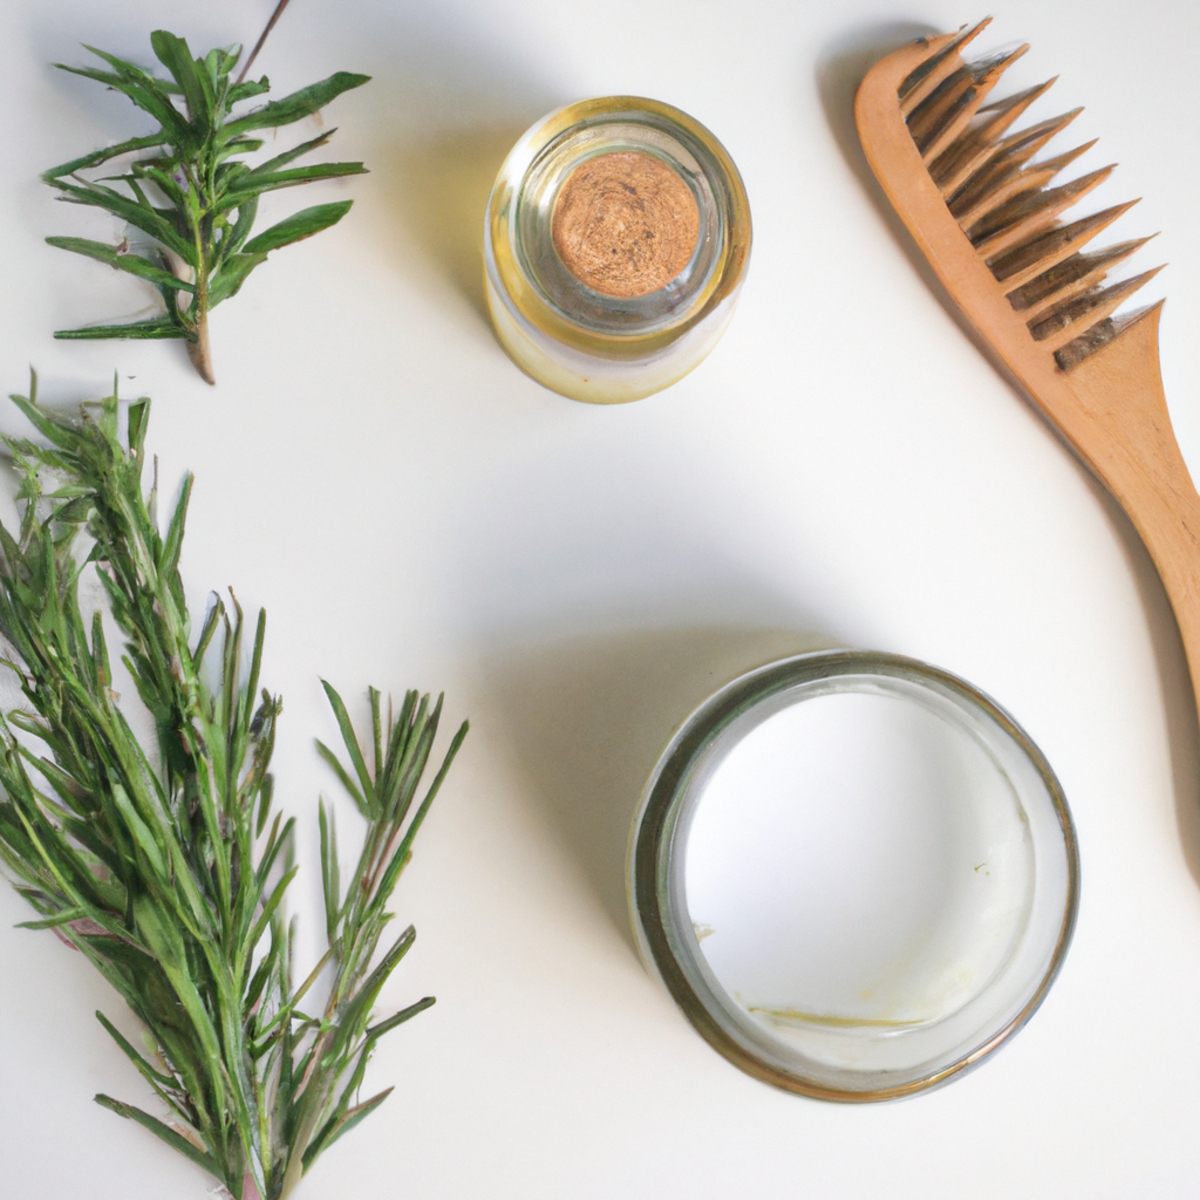 How to promote hair growth naturally - Natural hair care essentials: wooden comb, coconut oil, shea butter, and rosemary sprigs.